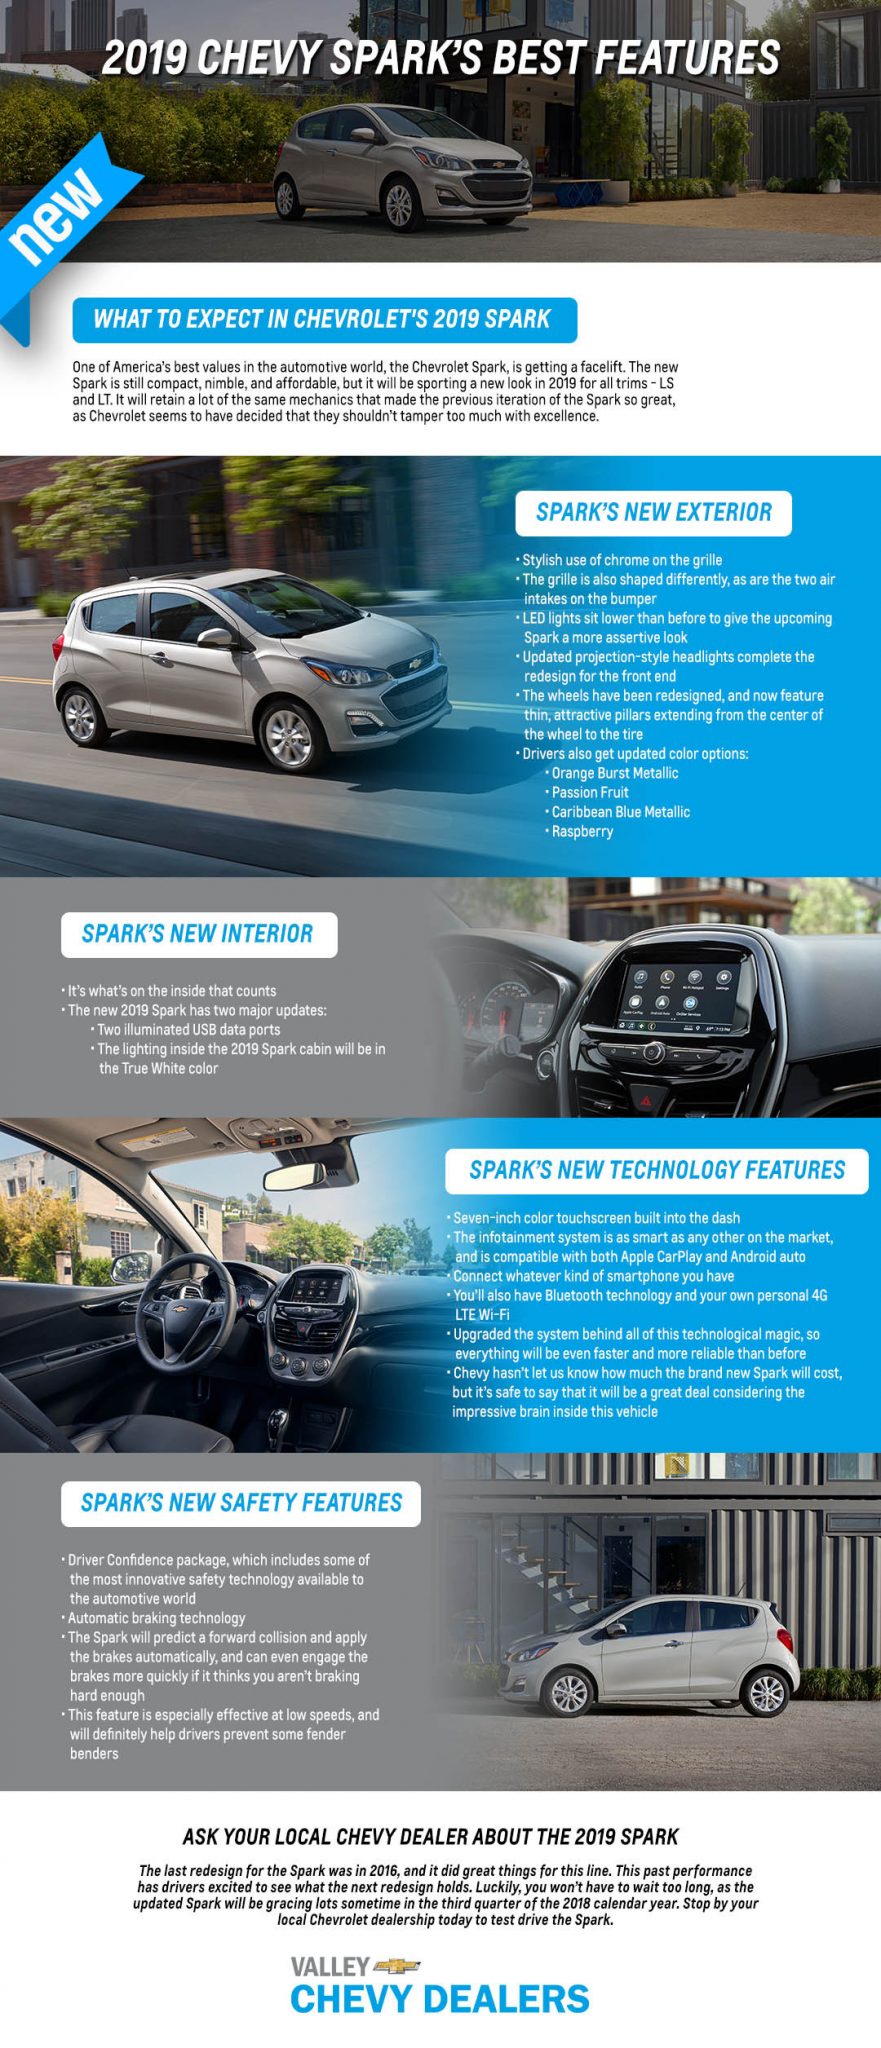 2019 Chevy Spark’s Best Features